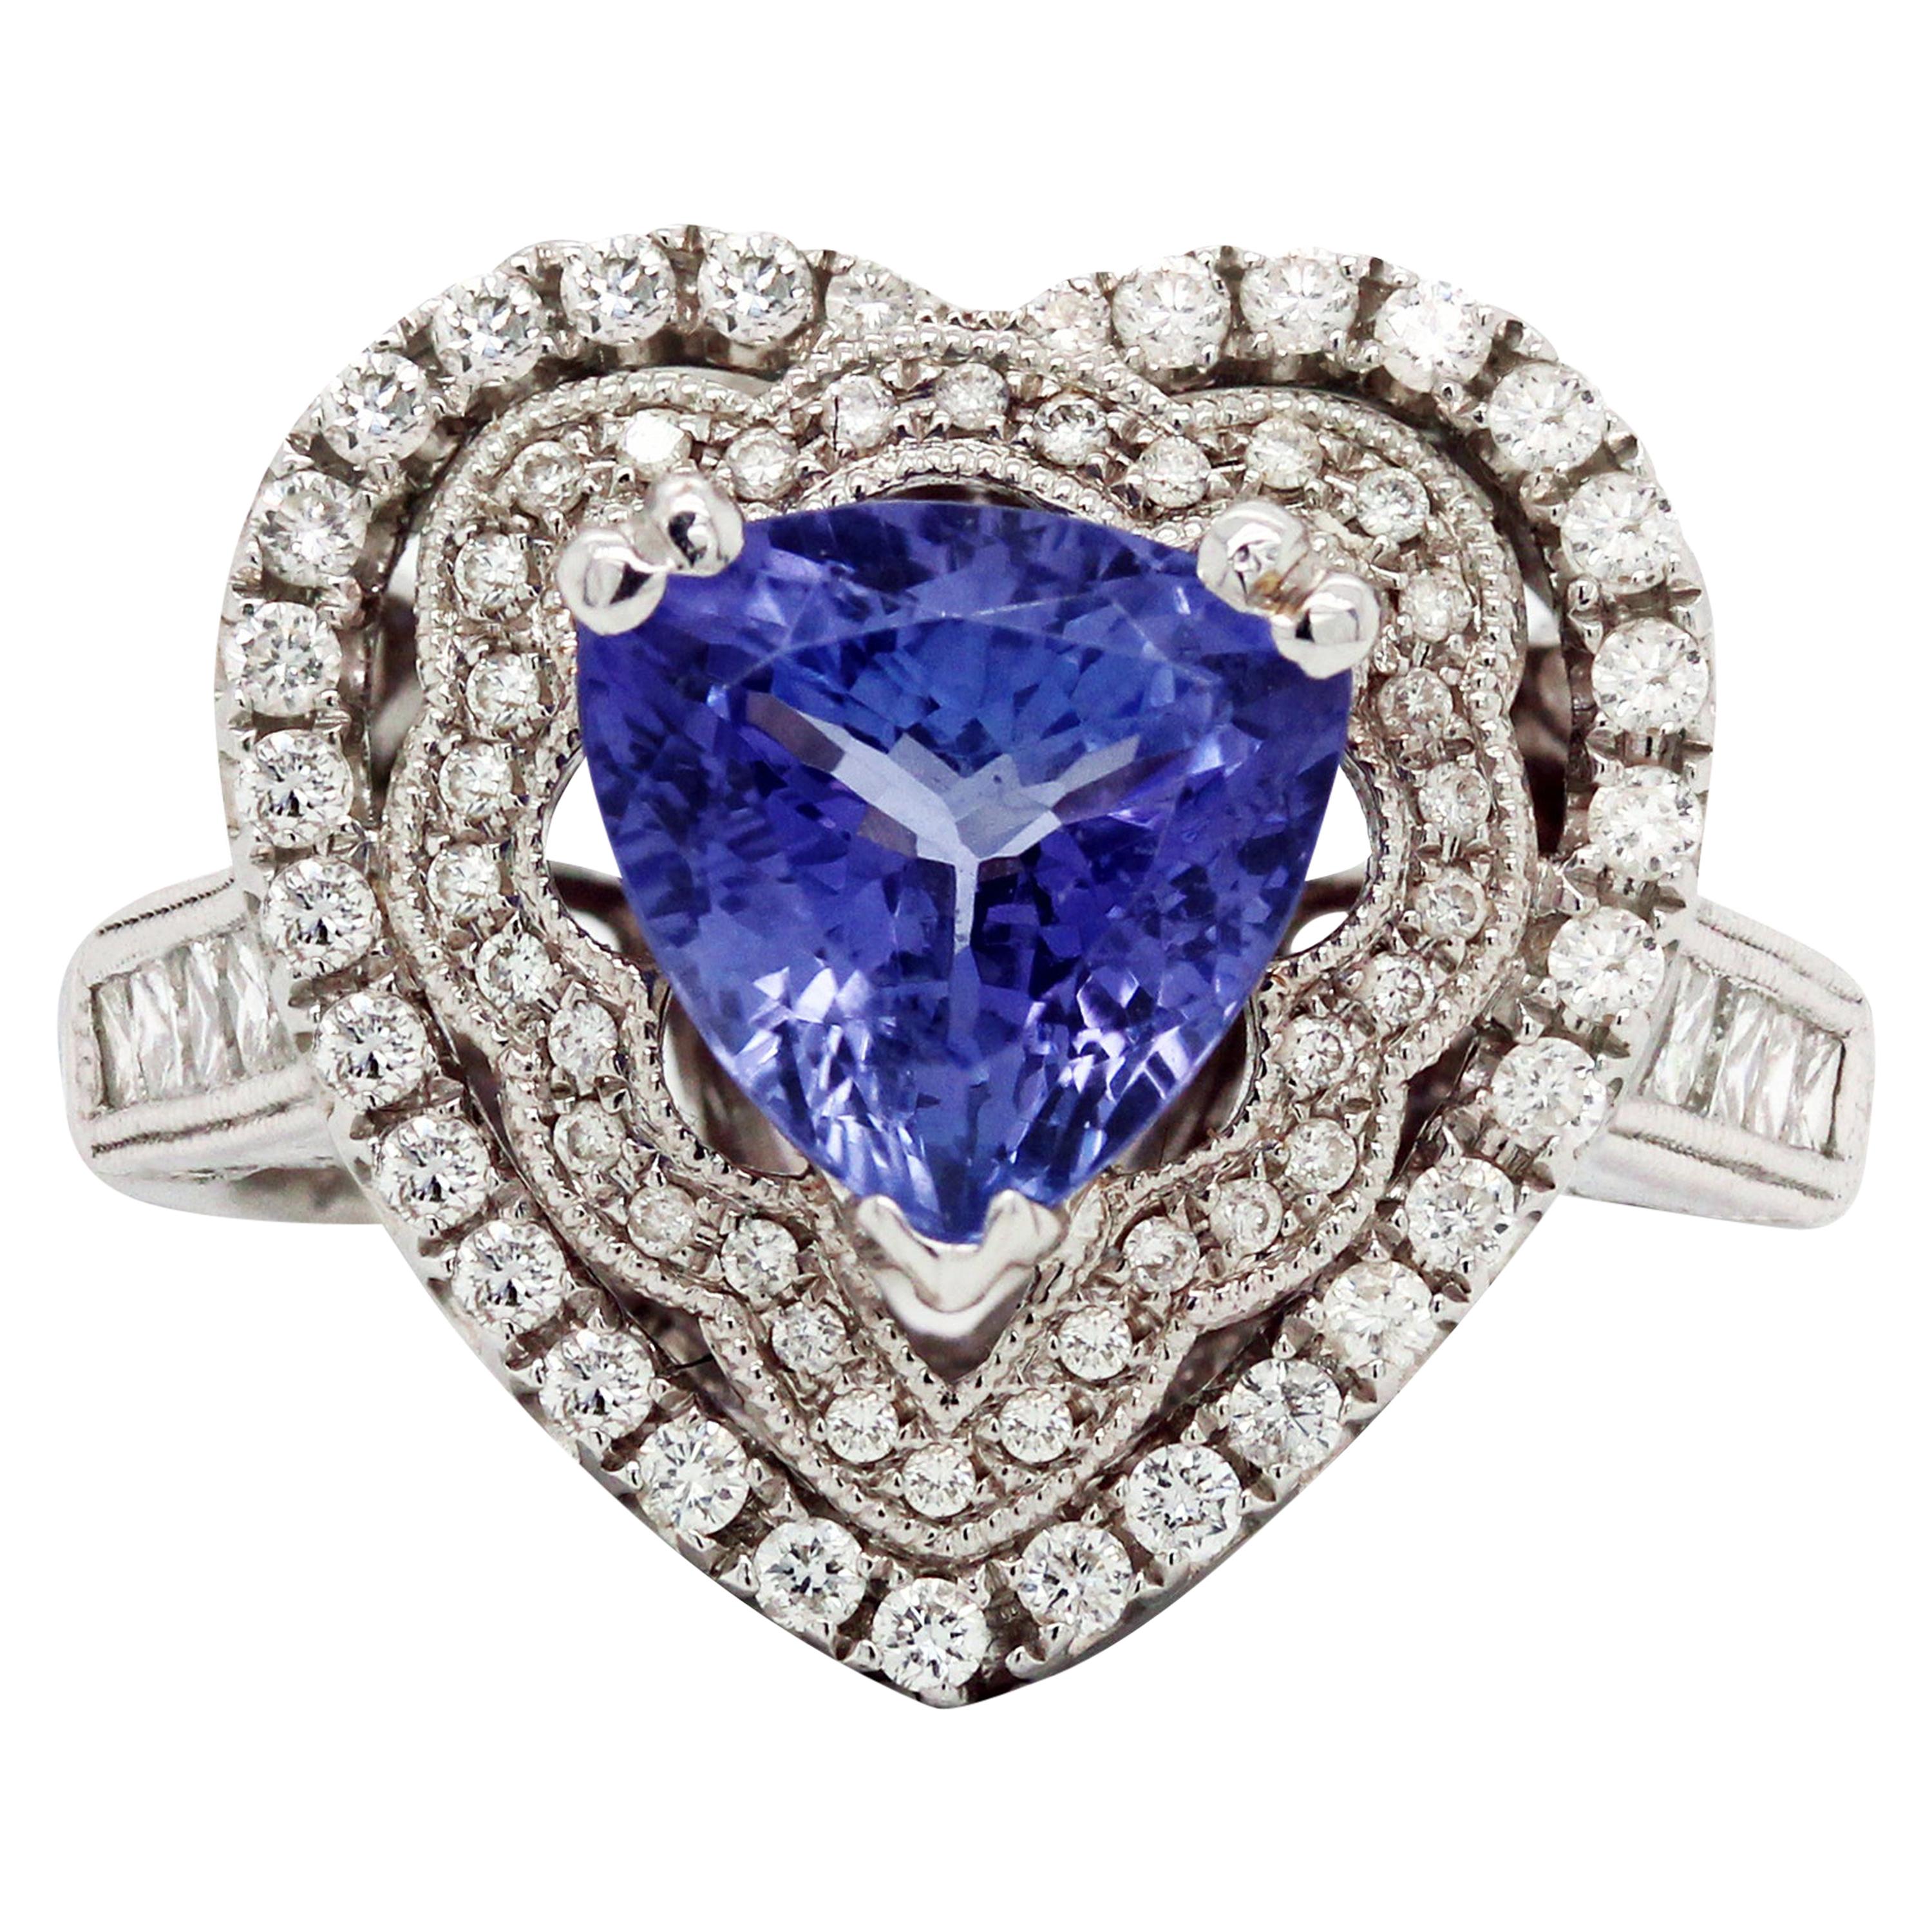 18 Karat White Gold and Diamond Heart Shape Cocktail Ring with Tanzanite Center